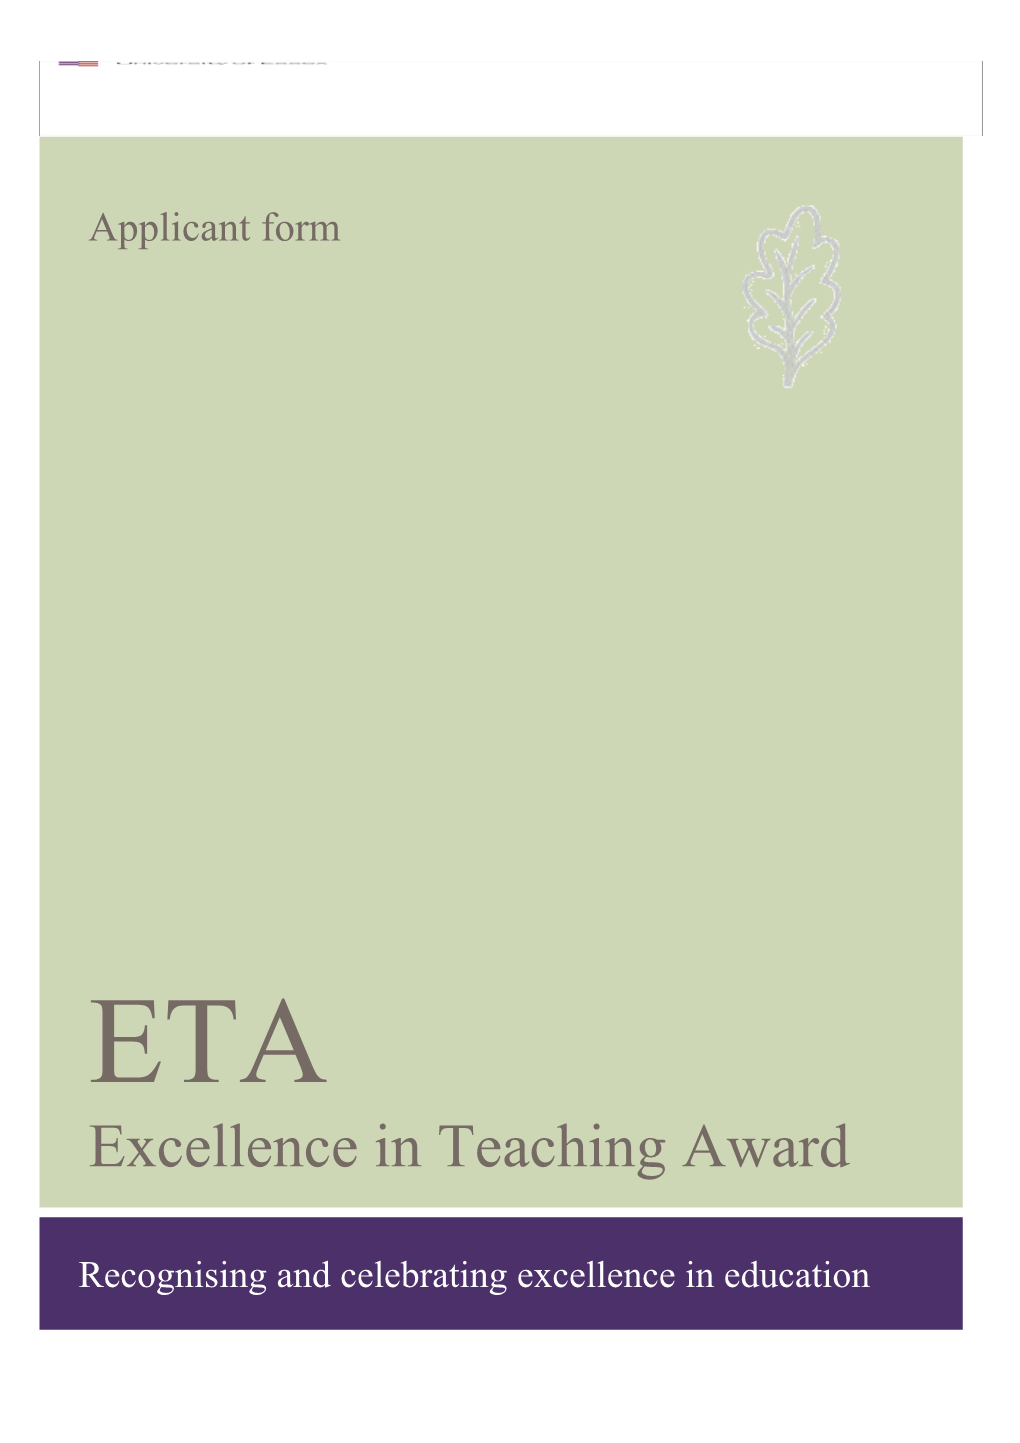 Recognising and Celebrating Excellence in Education